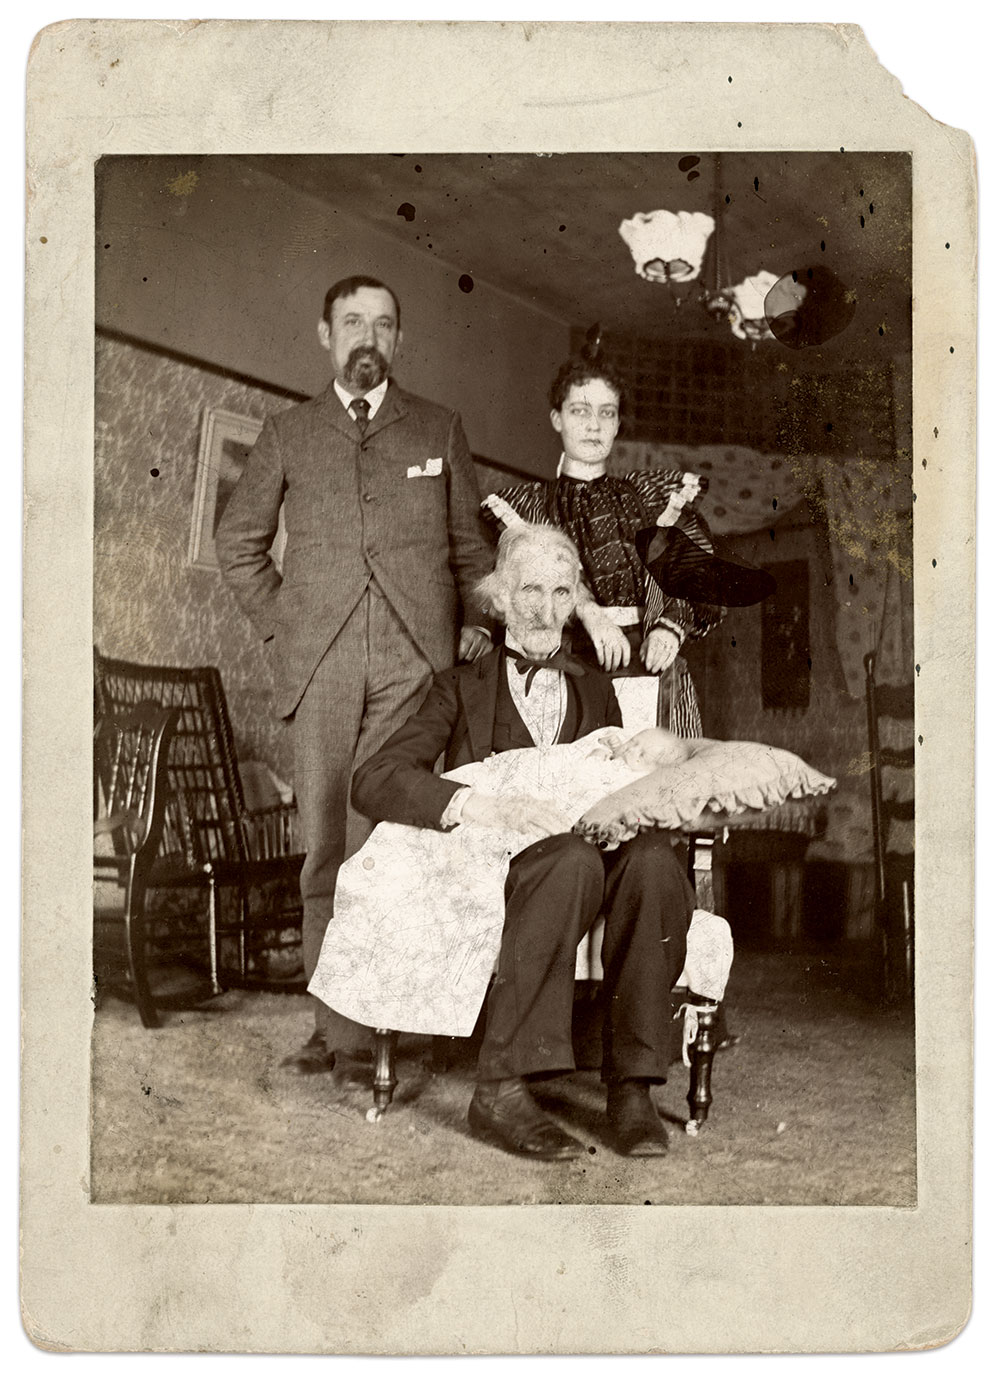 Four generations in 1896 (below): Haymond and his daughter, Delia, stand behind Haymond’s father Luther, who holds baby Eleanor, the future mother of Ned. Cabinet card by an unidentified photographer.